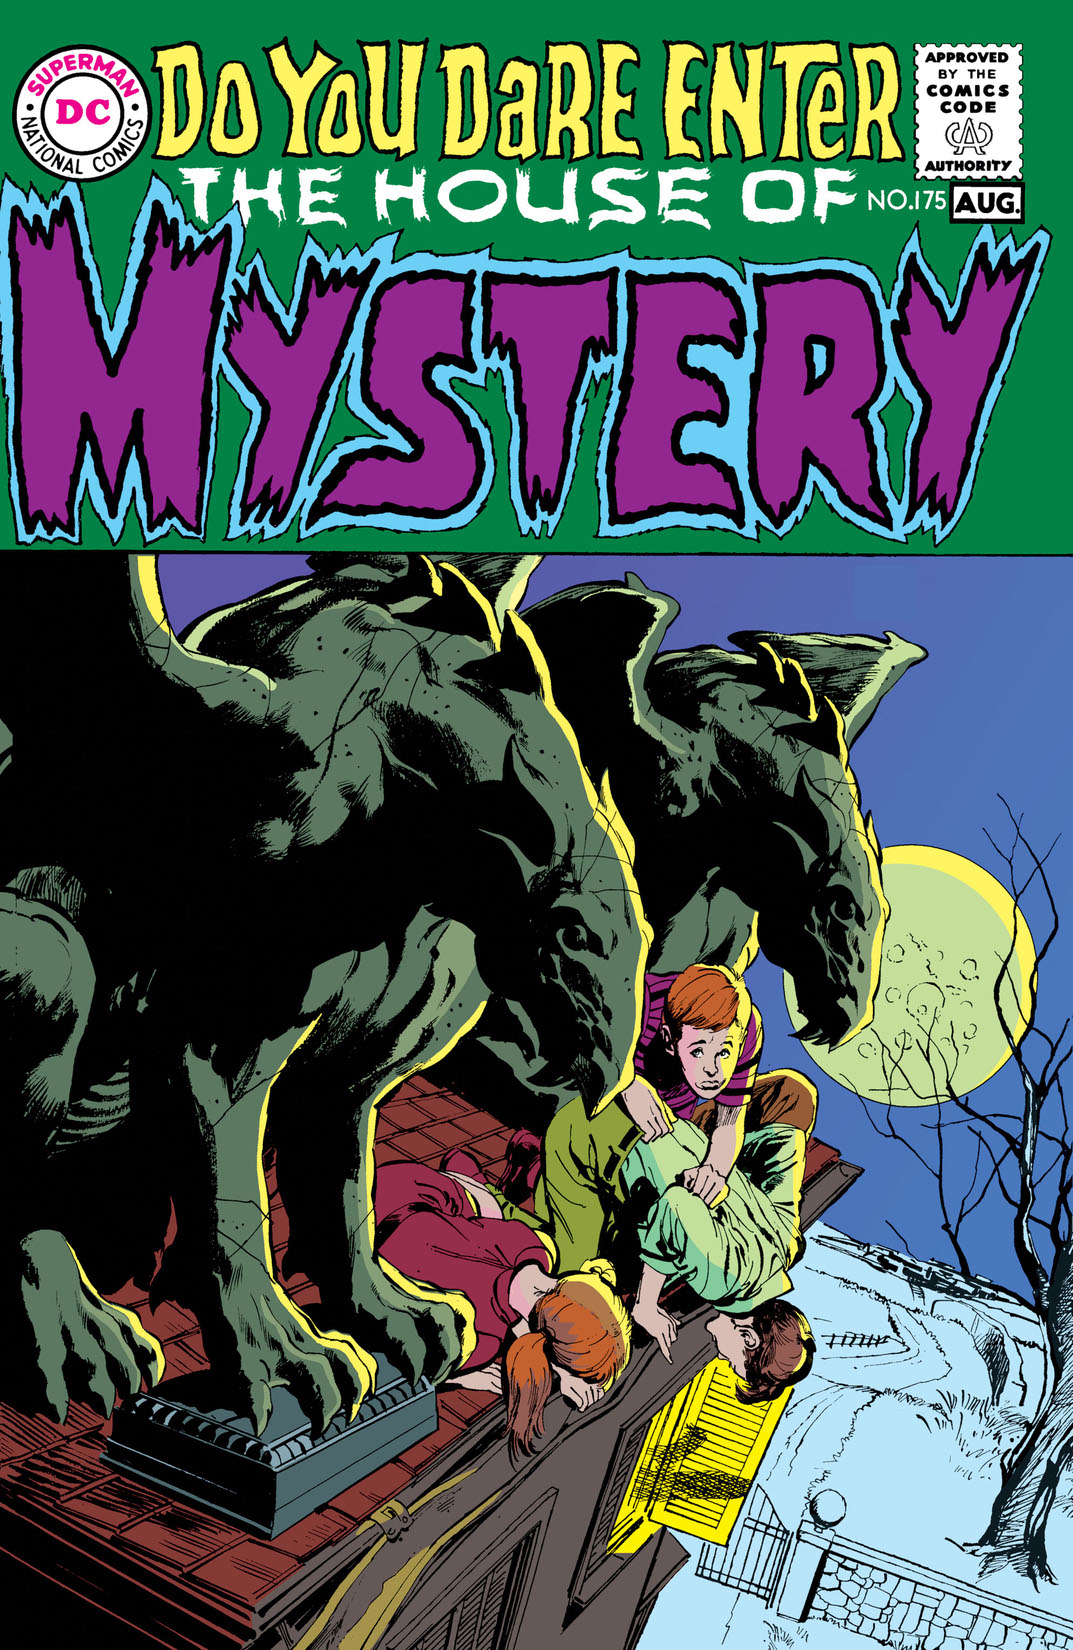 House of Mystery (1951-) #175 preview images